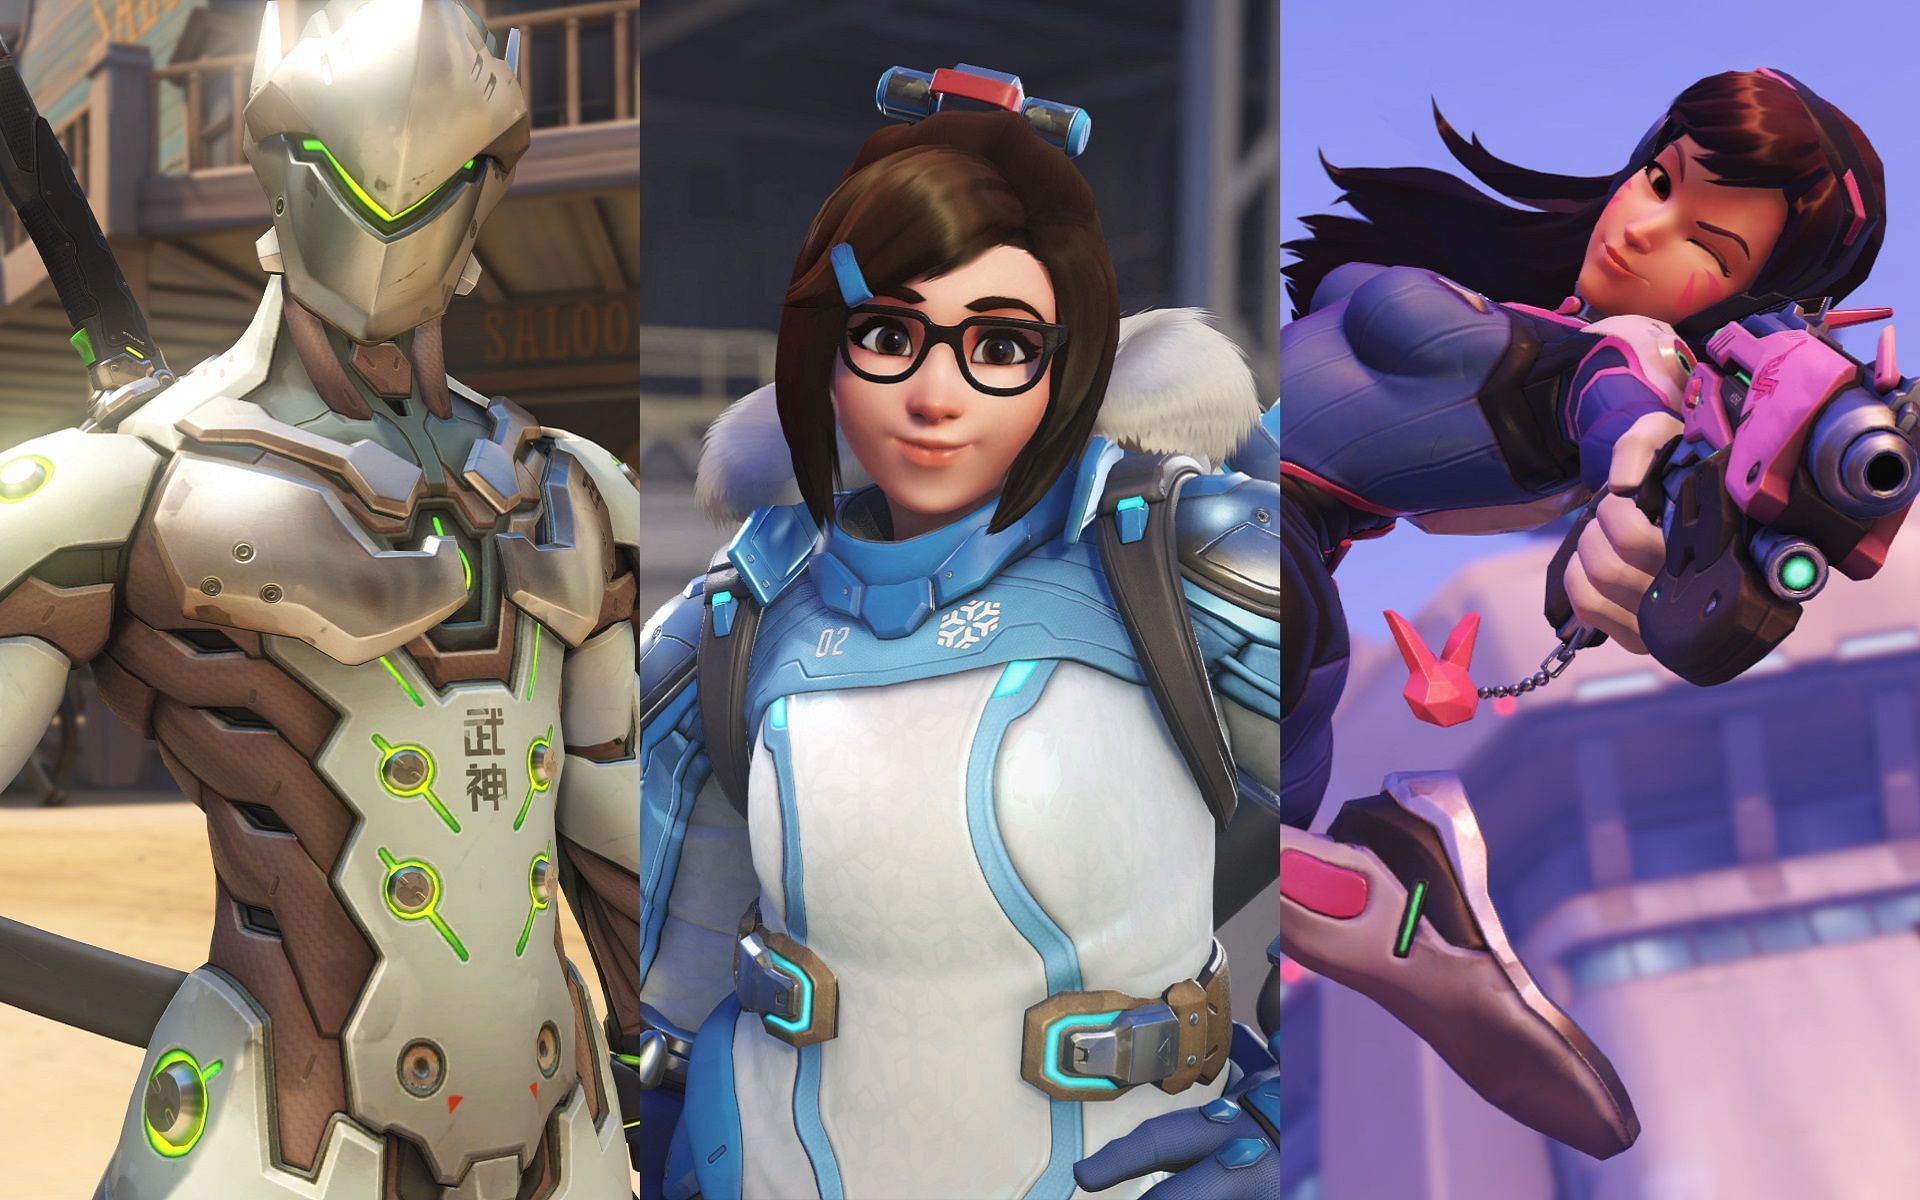 Mei returning to Overwatch 2 next week (Images via Blizzard Entertainment)